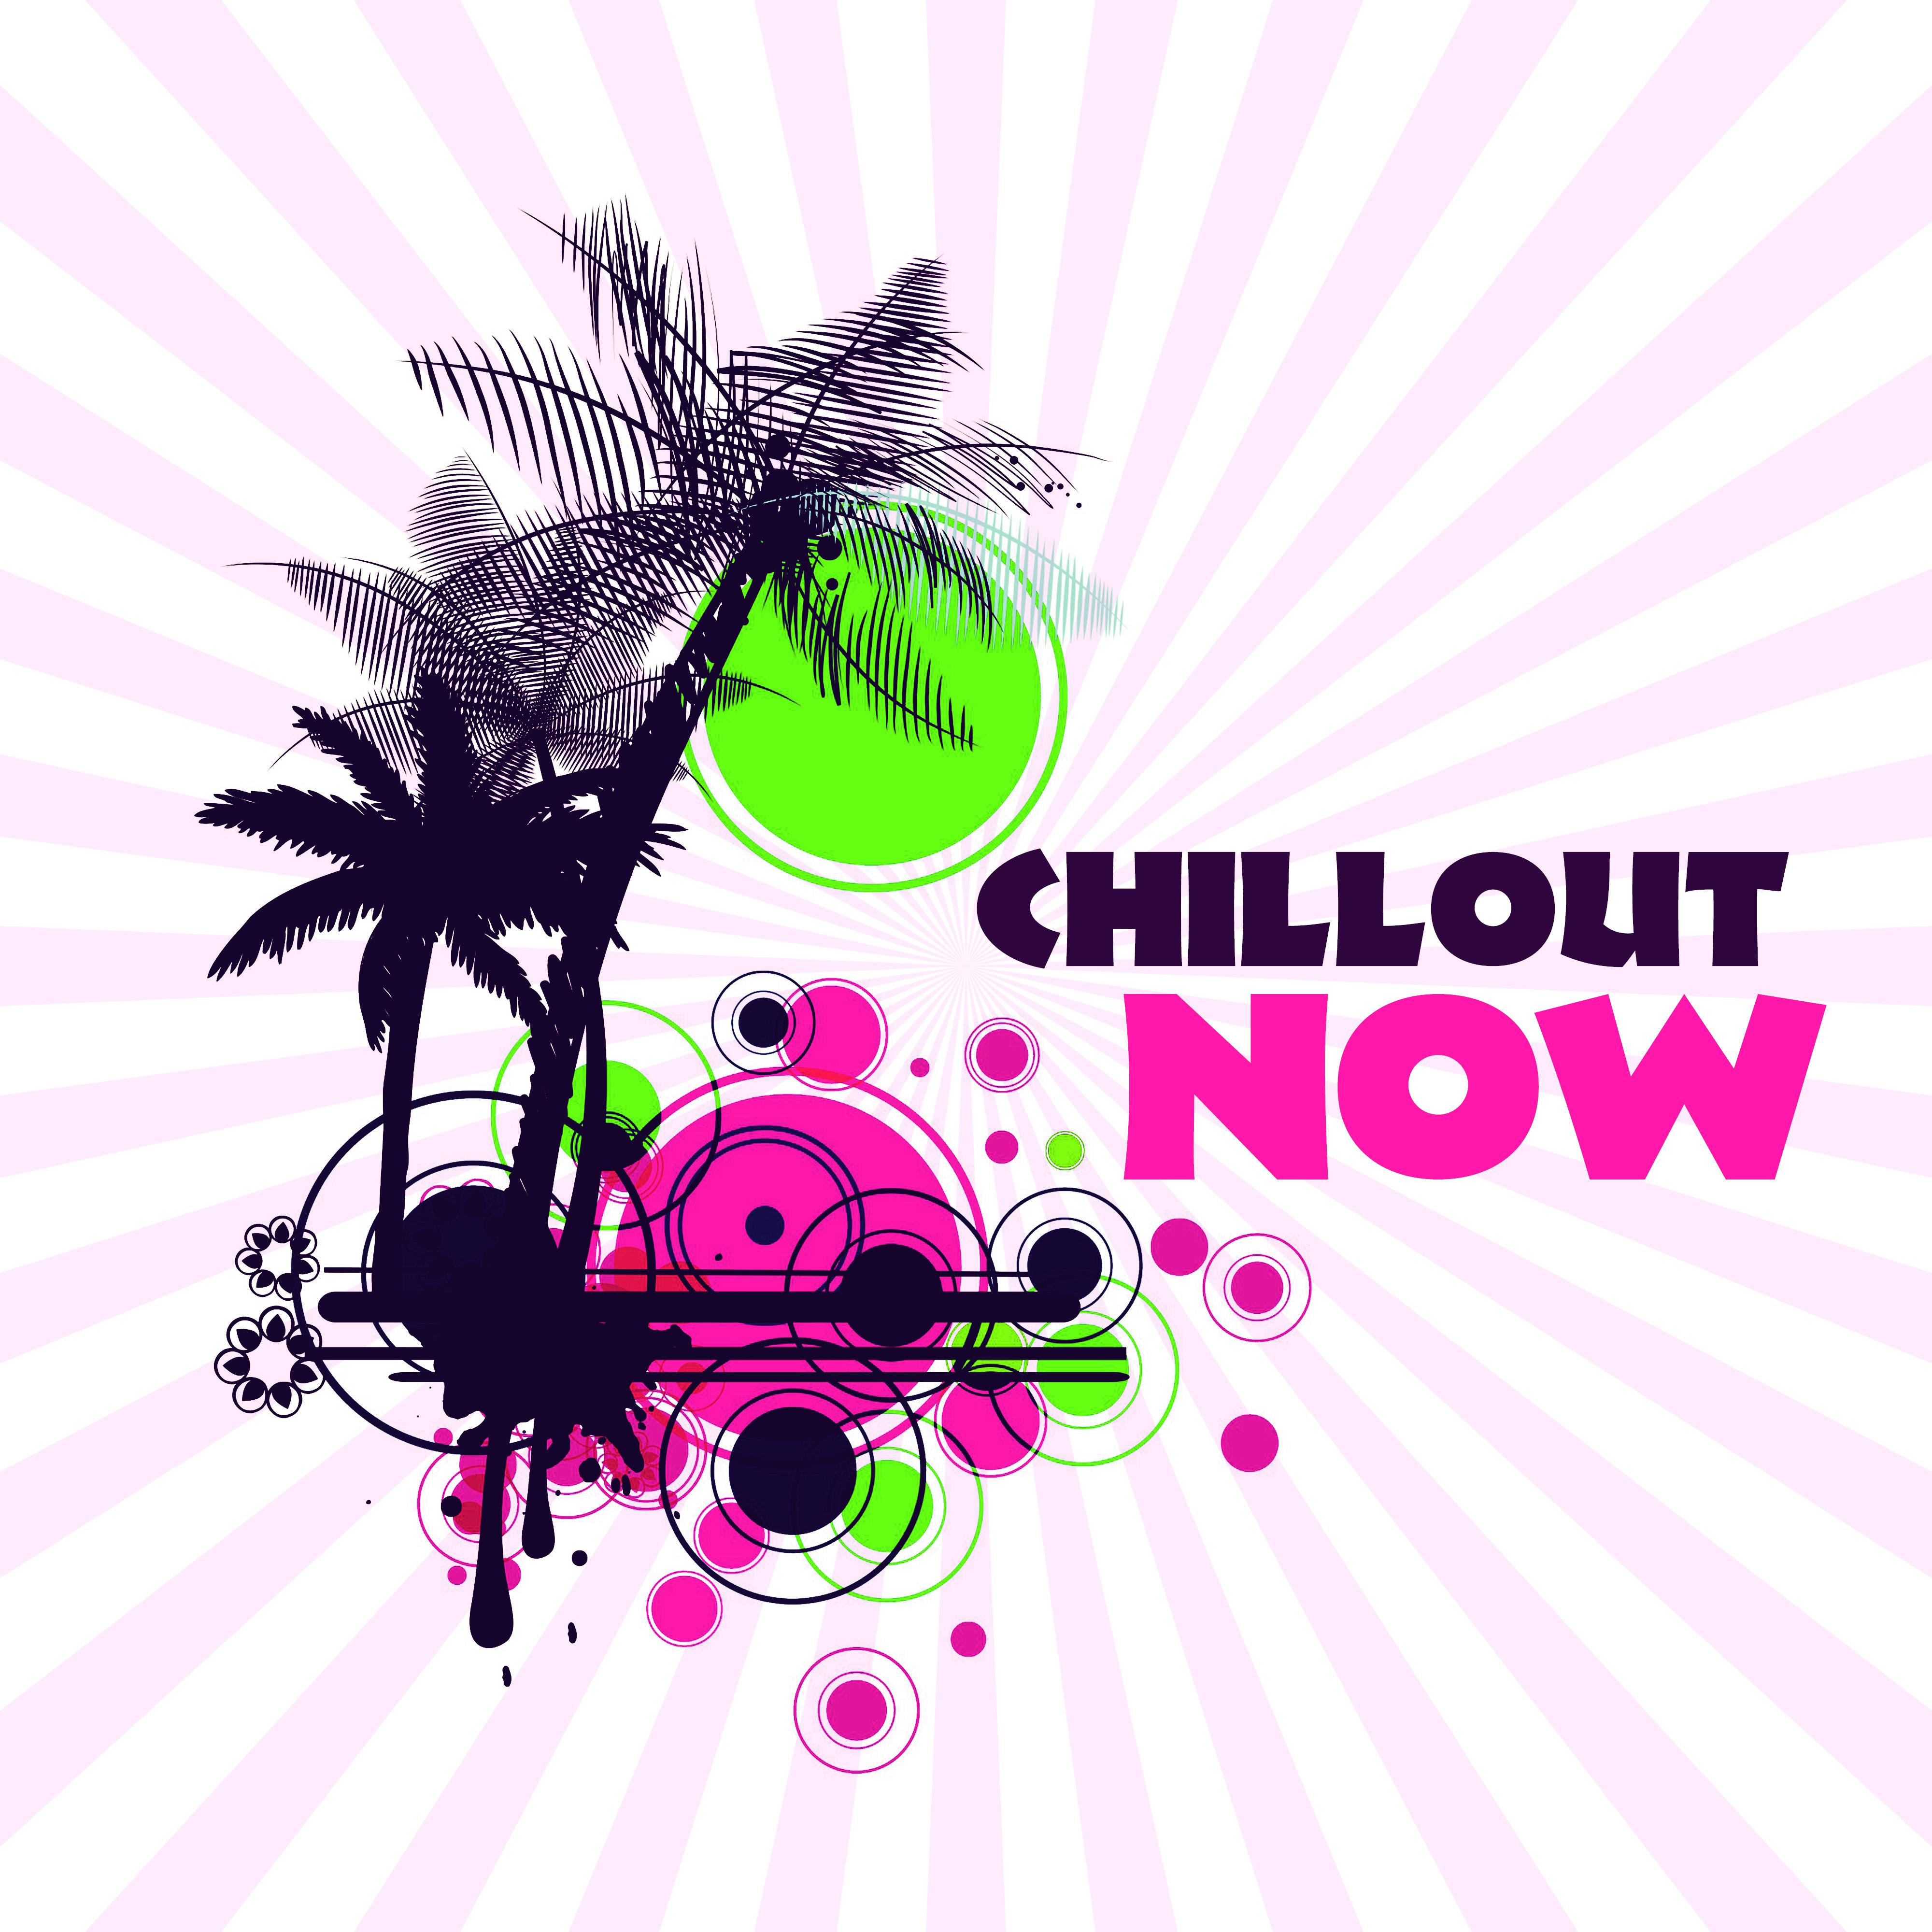 Chillout Now – Summer Lounge, Chill Out 2017, Dance Party Music, Relax, Electro Vibes